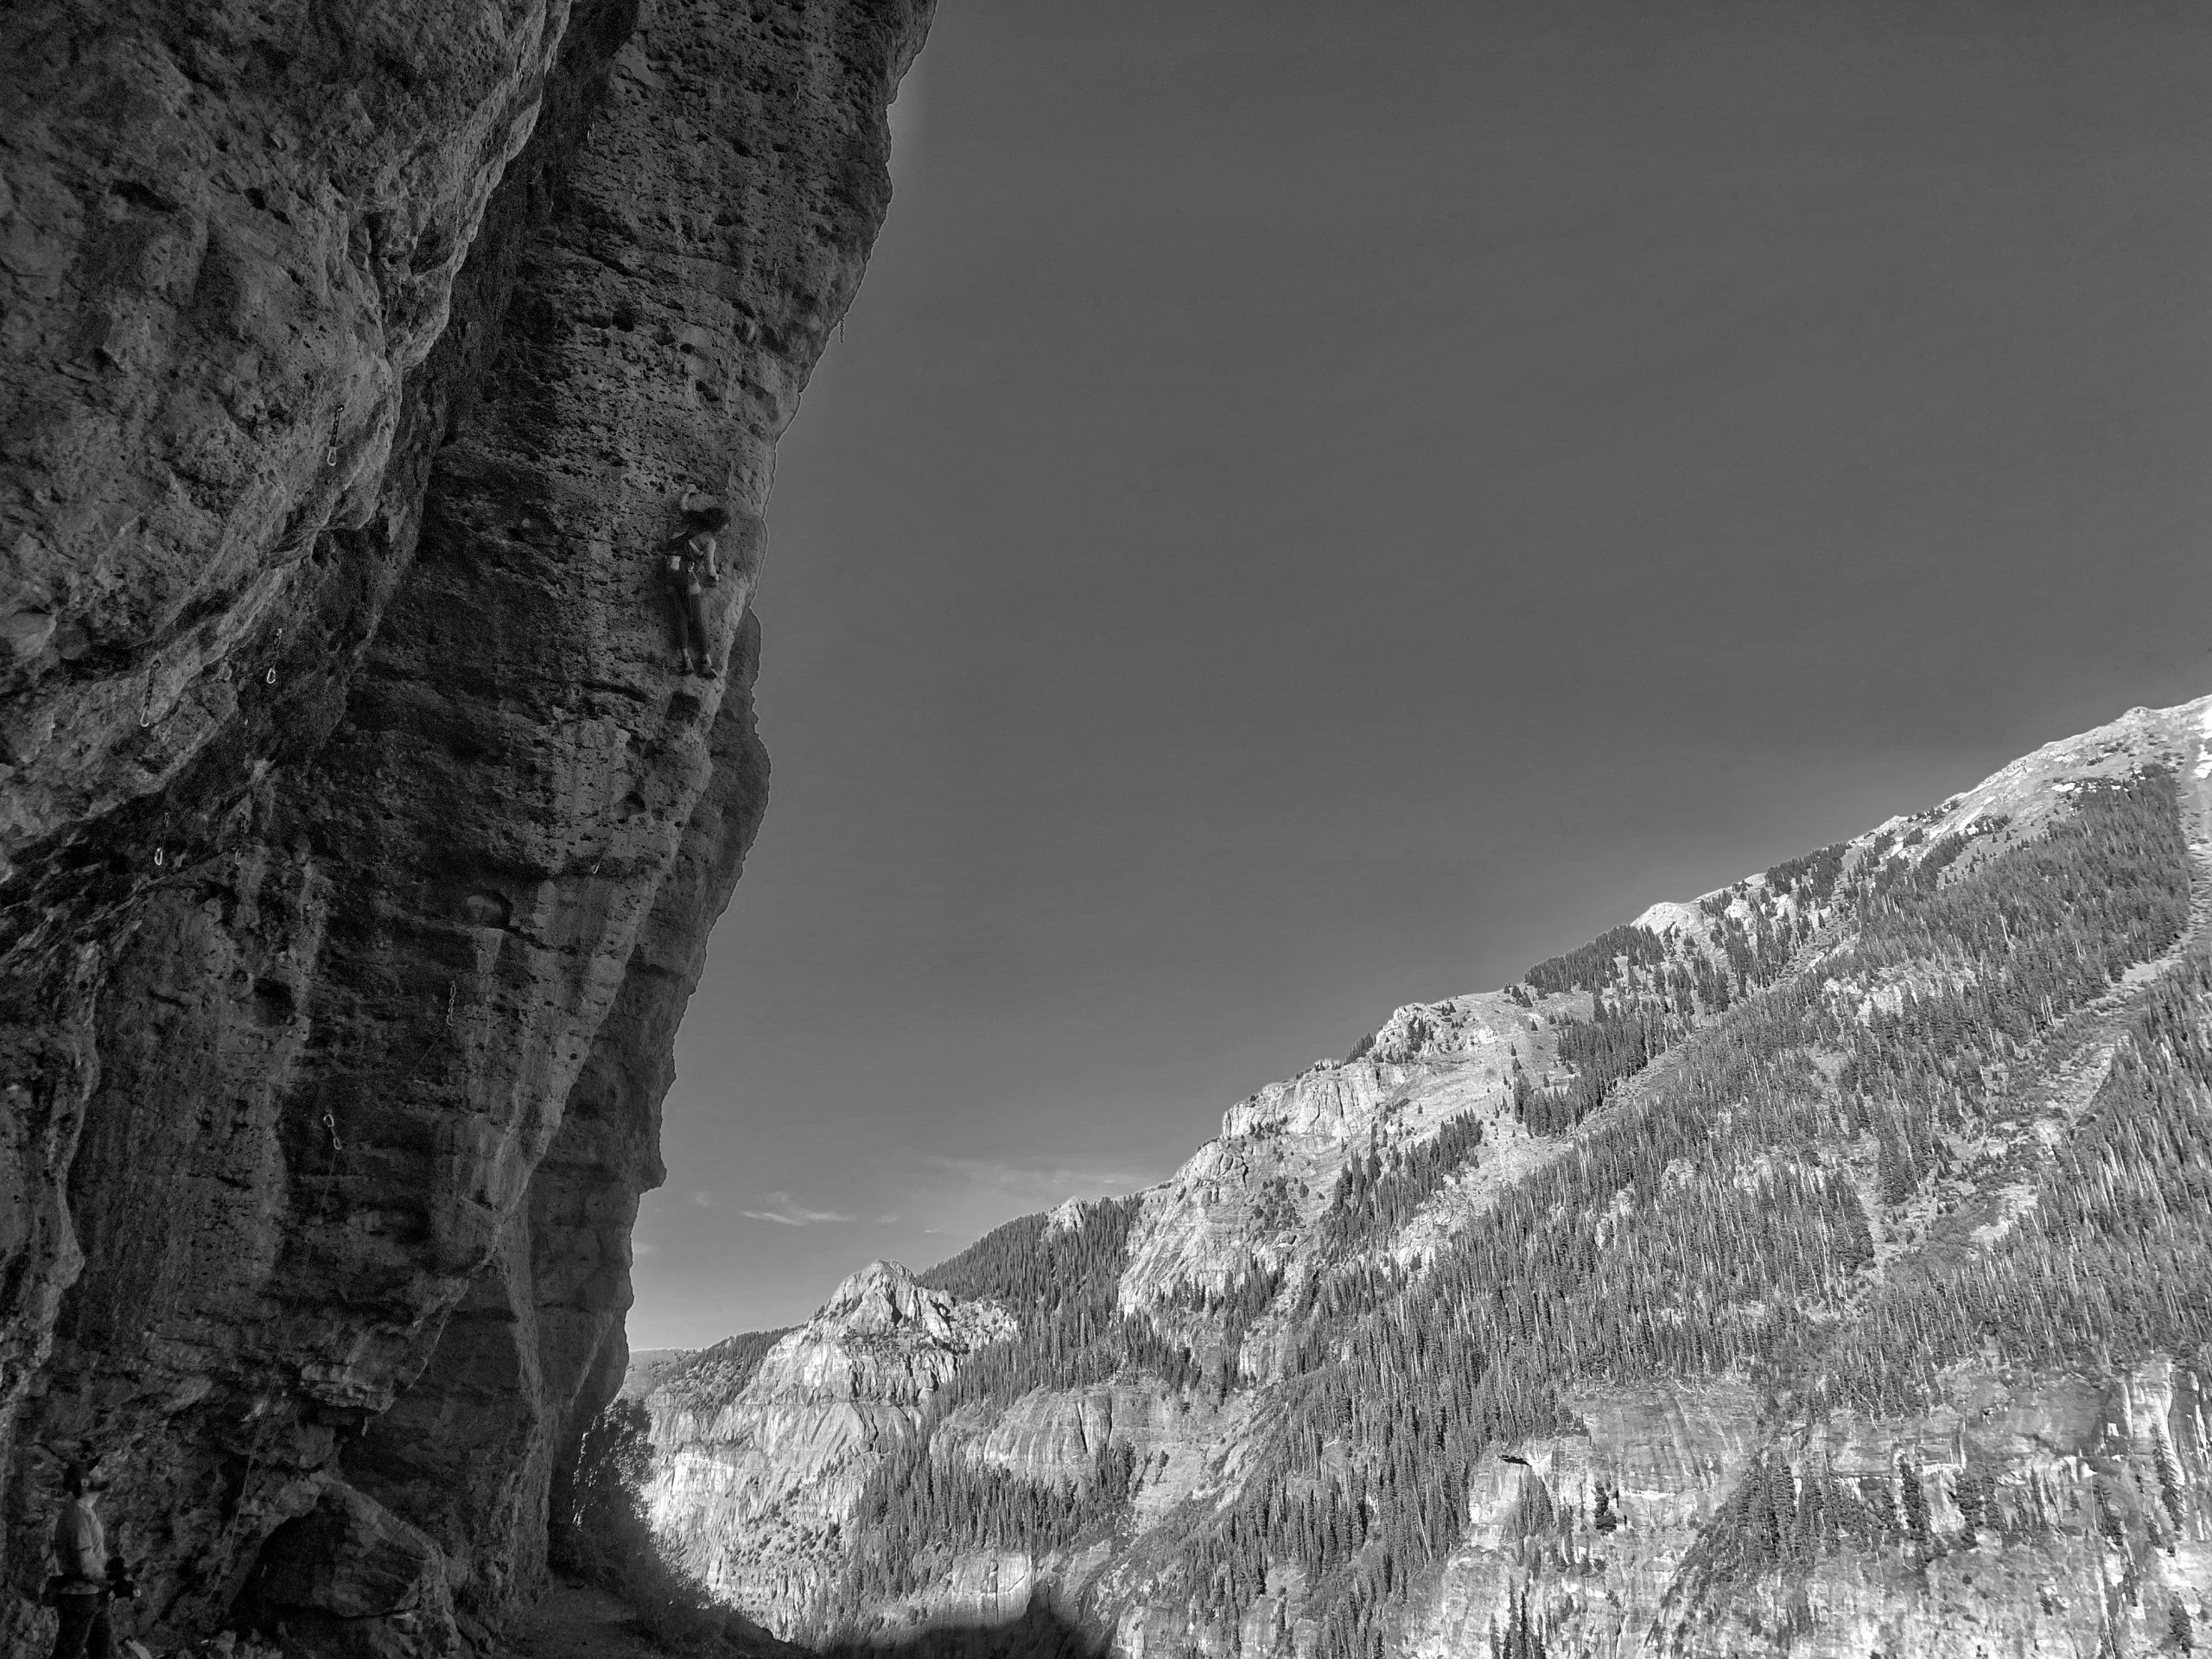 Black and white photo of a female climber on a steep arete climb with mountains in the background